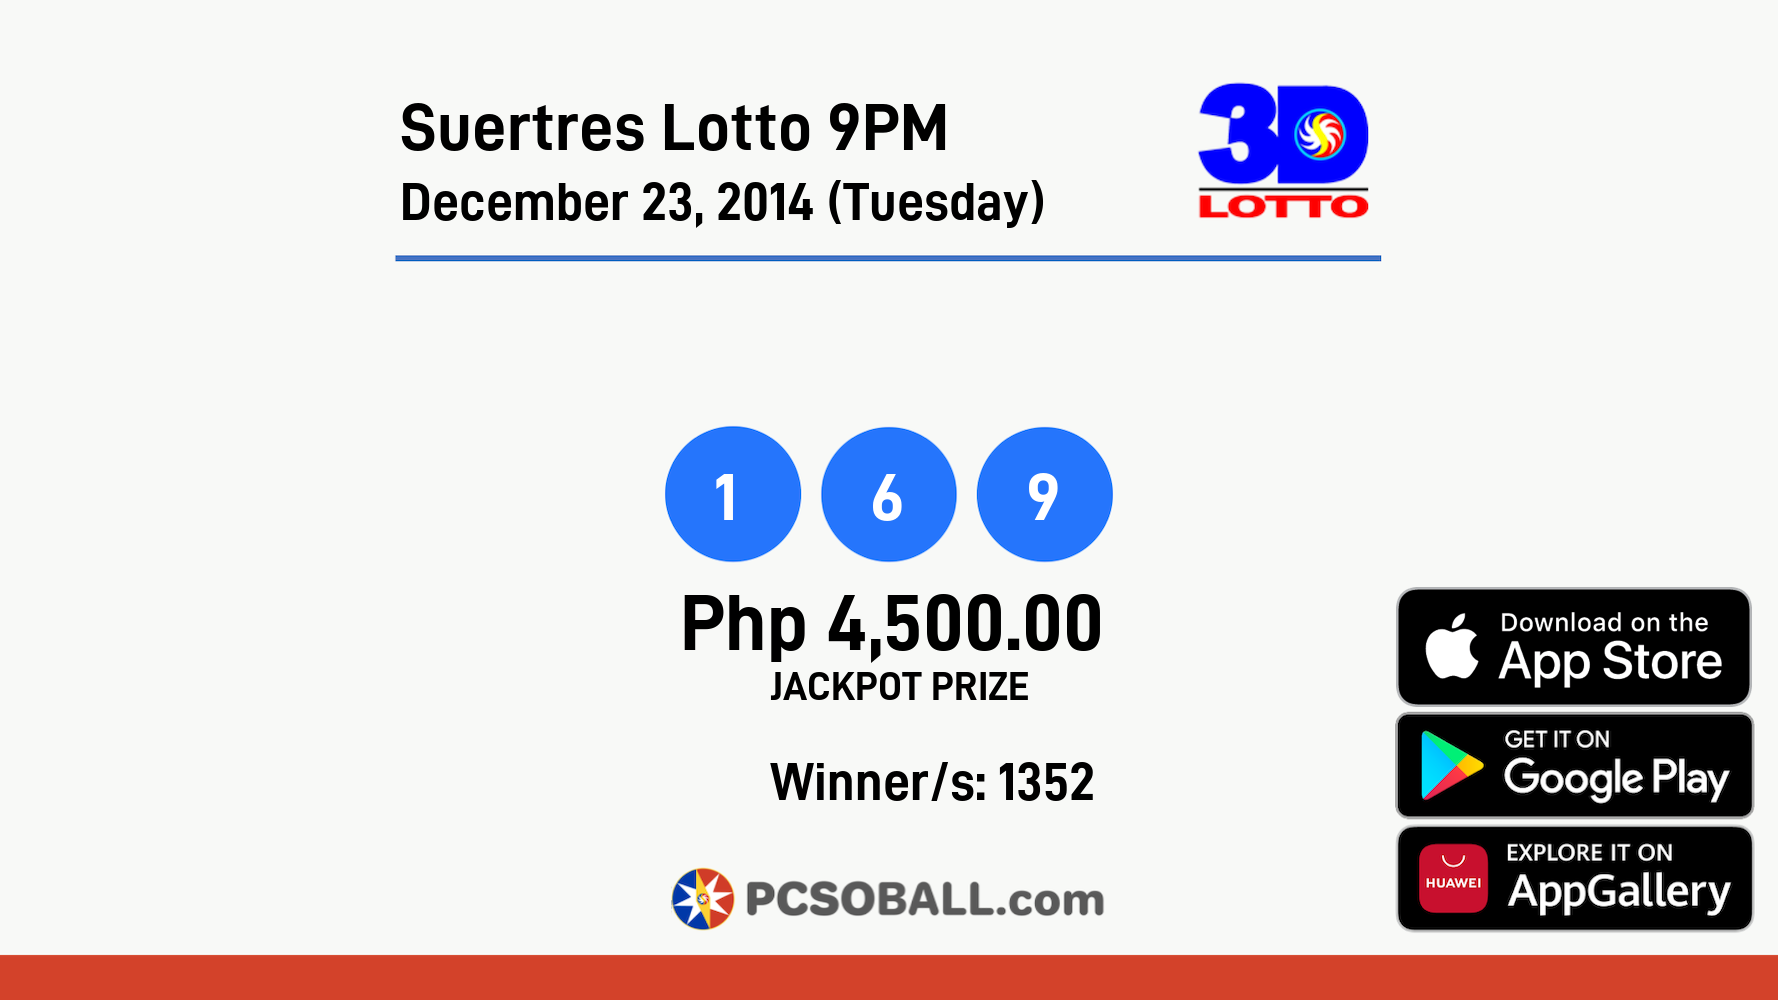 Suertres Lotto 9PM December 23, 2014 (Tuesday) Result